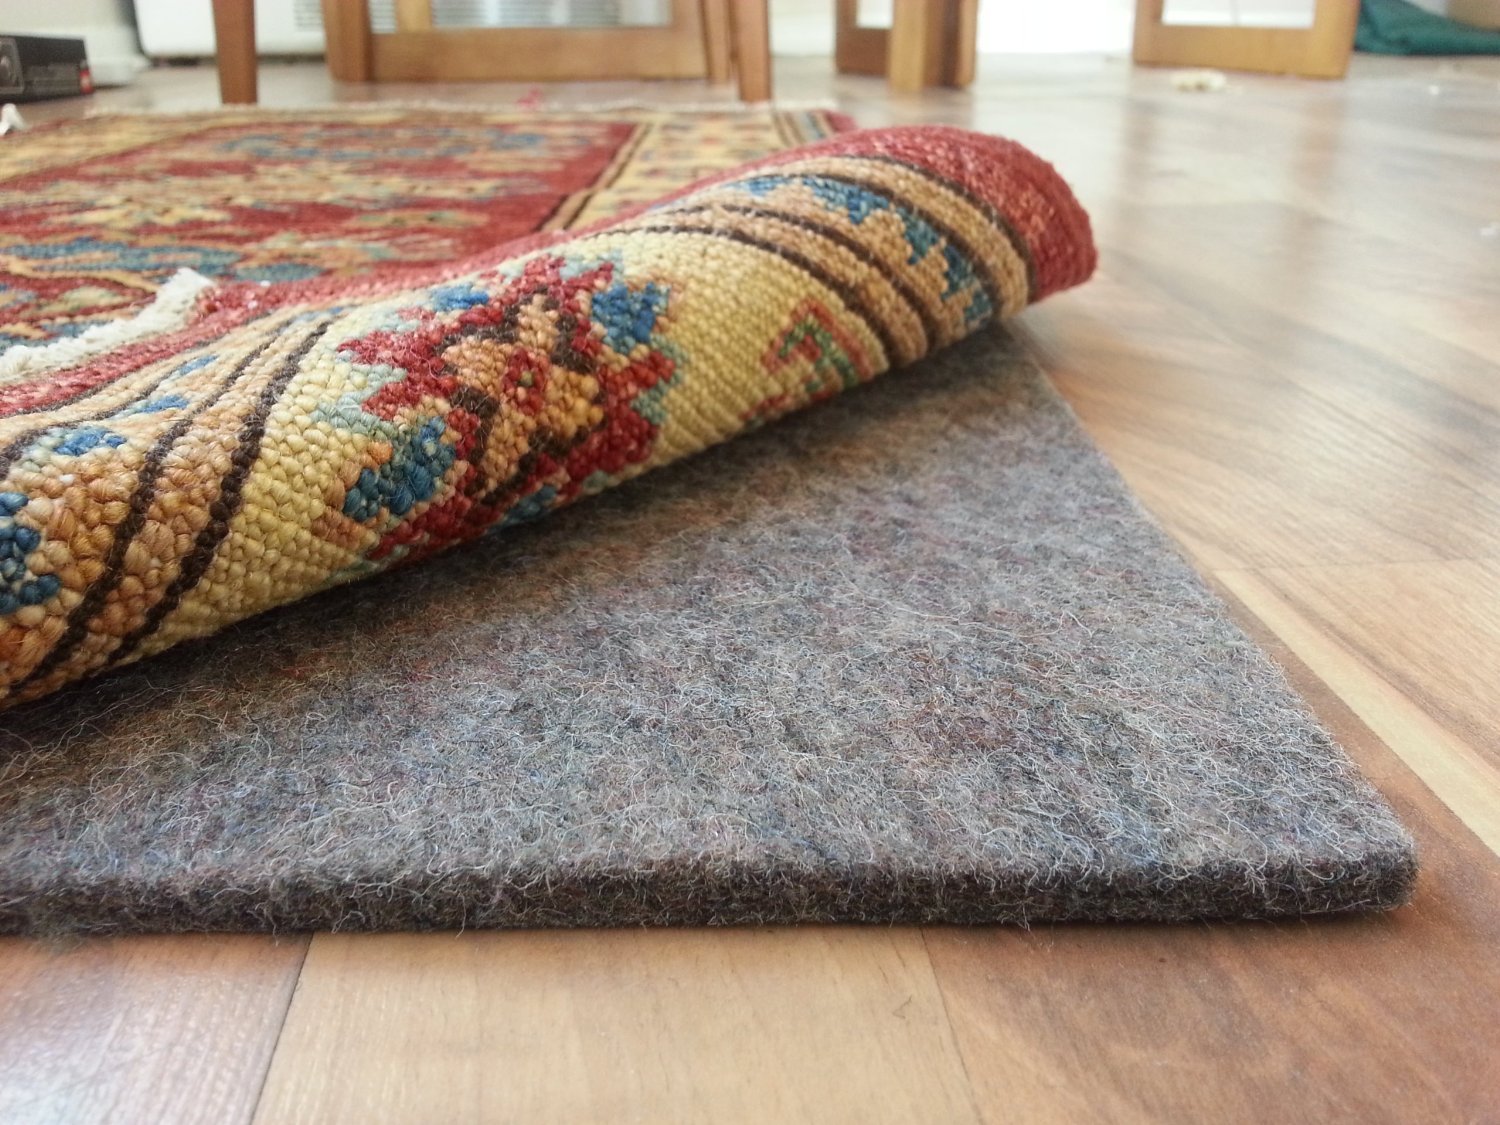 How To Clean An Area Rug Ultimate, How To Clean Rug Over Hardwood Floor